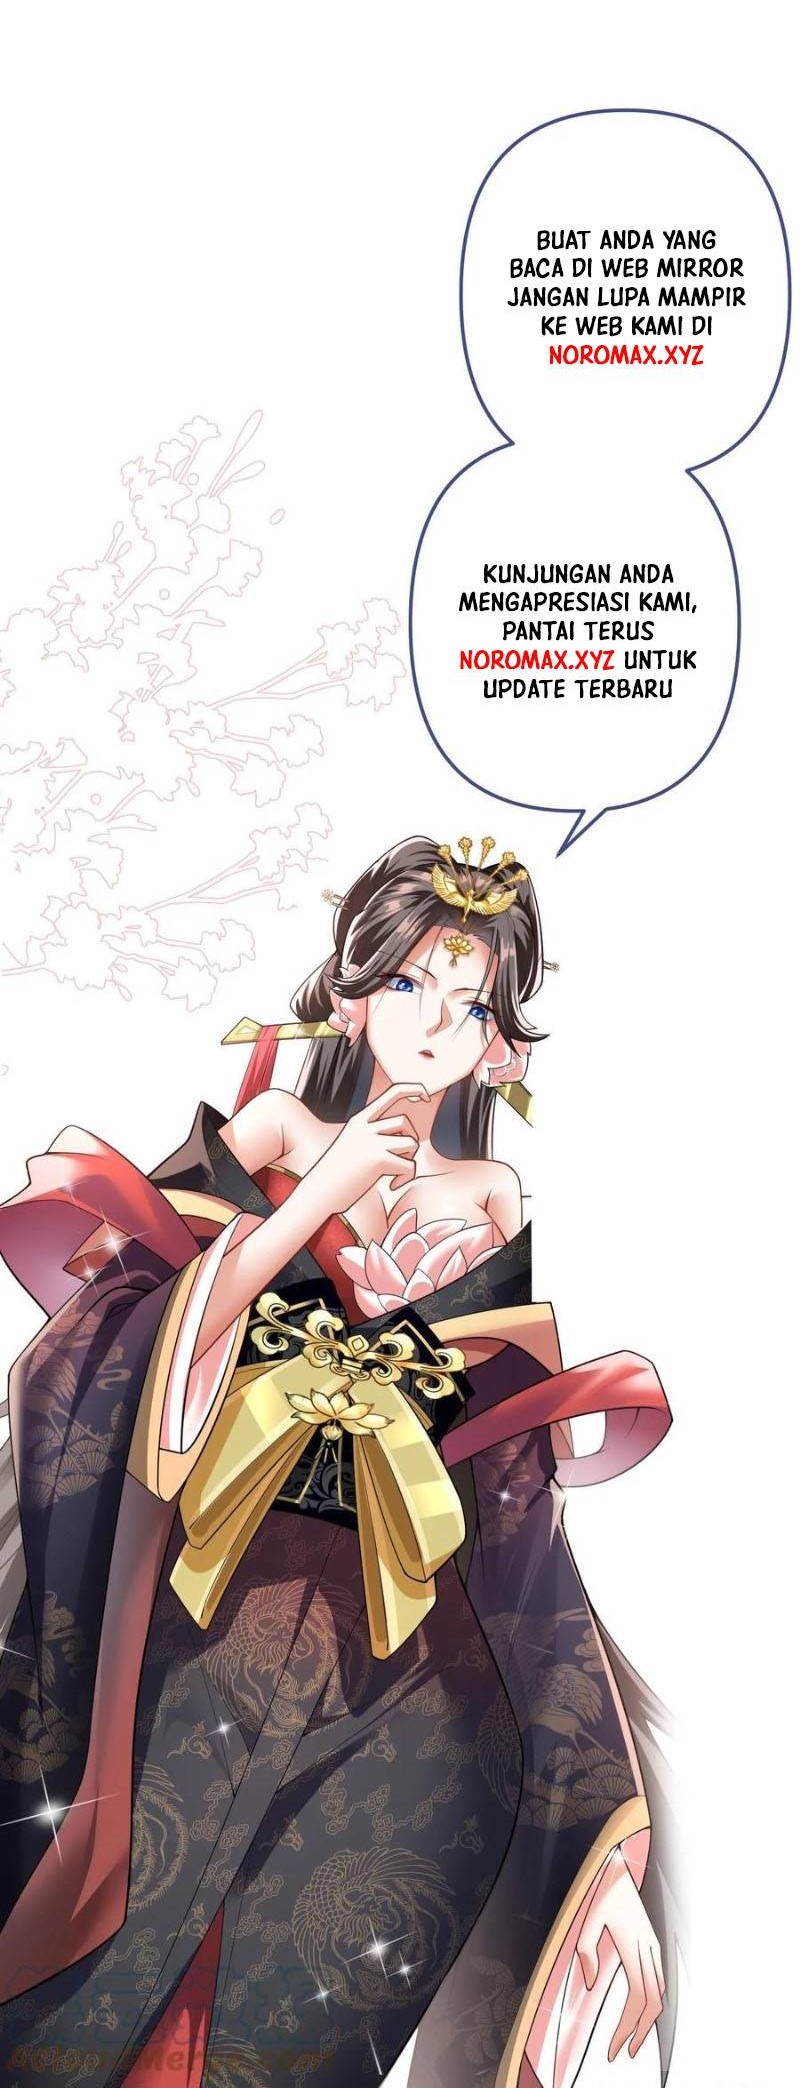 It’s Over! The Queen’s Soft Rice Husband is Actually Invincible Chapter 119